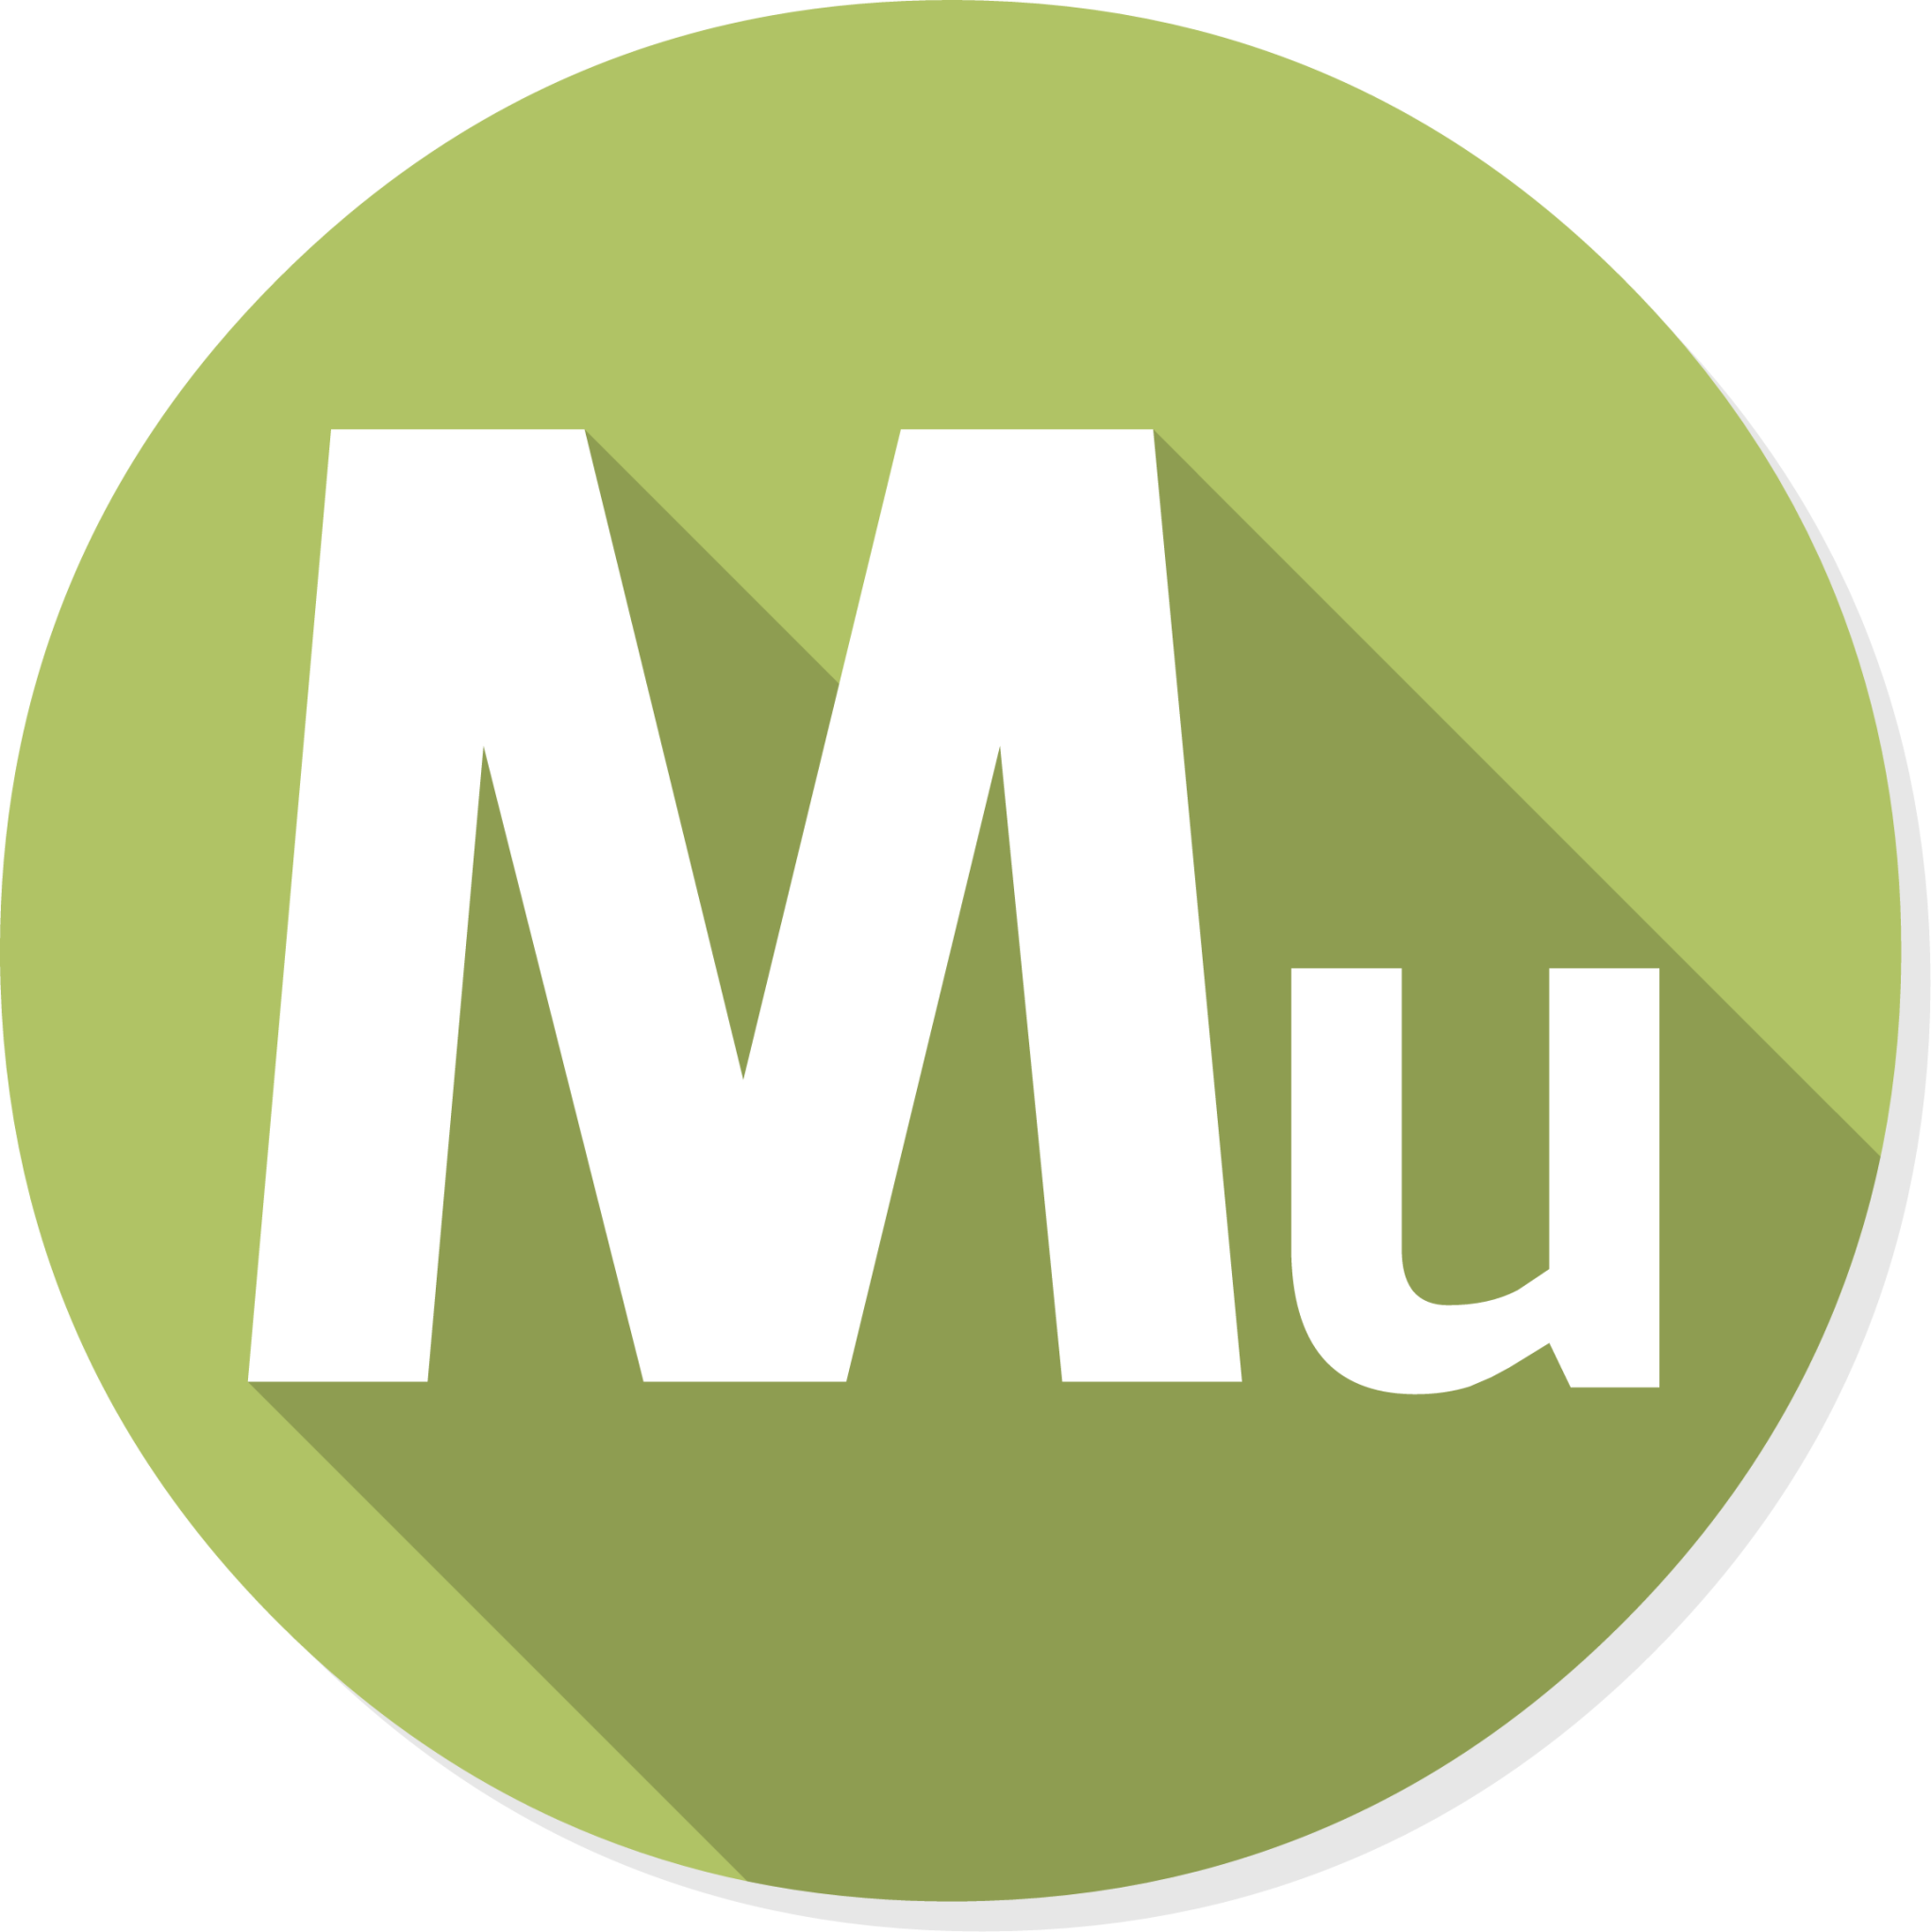 Apps Adobe Muse icon